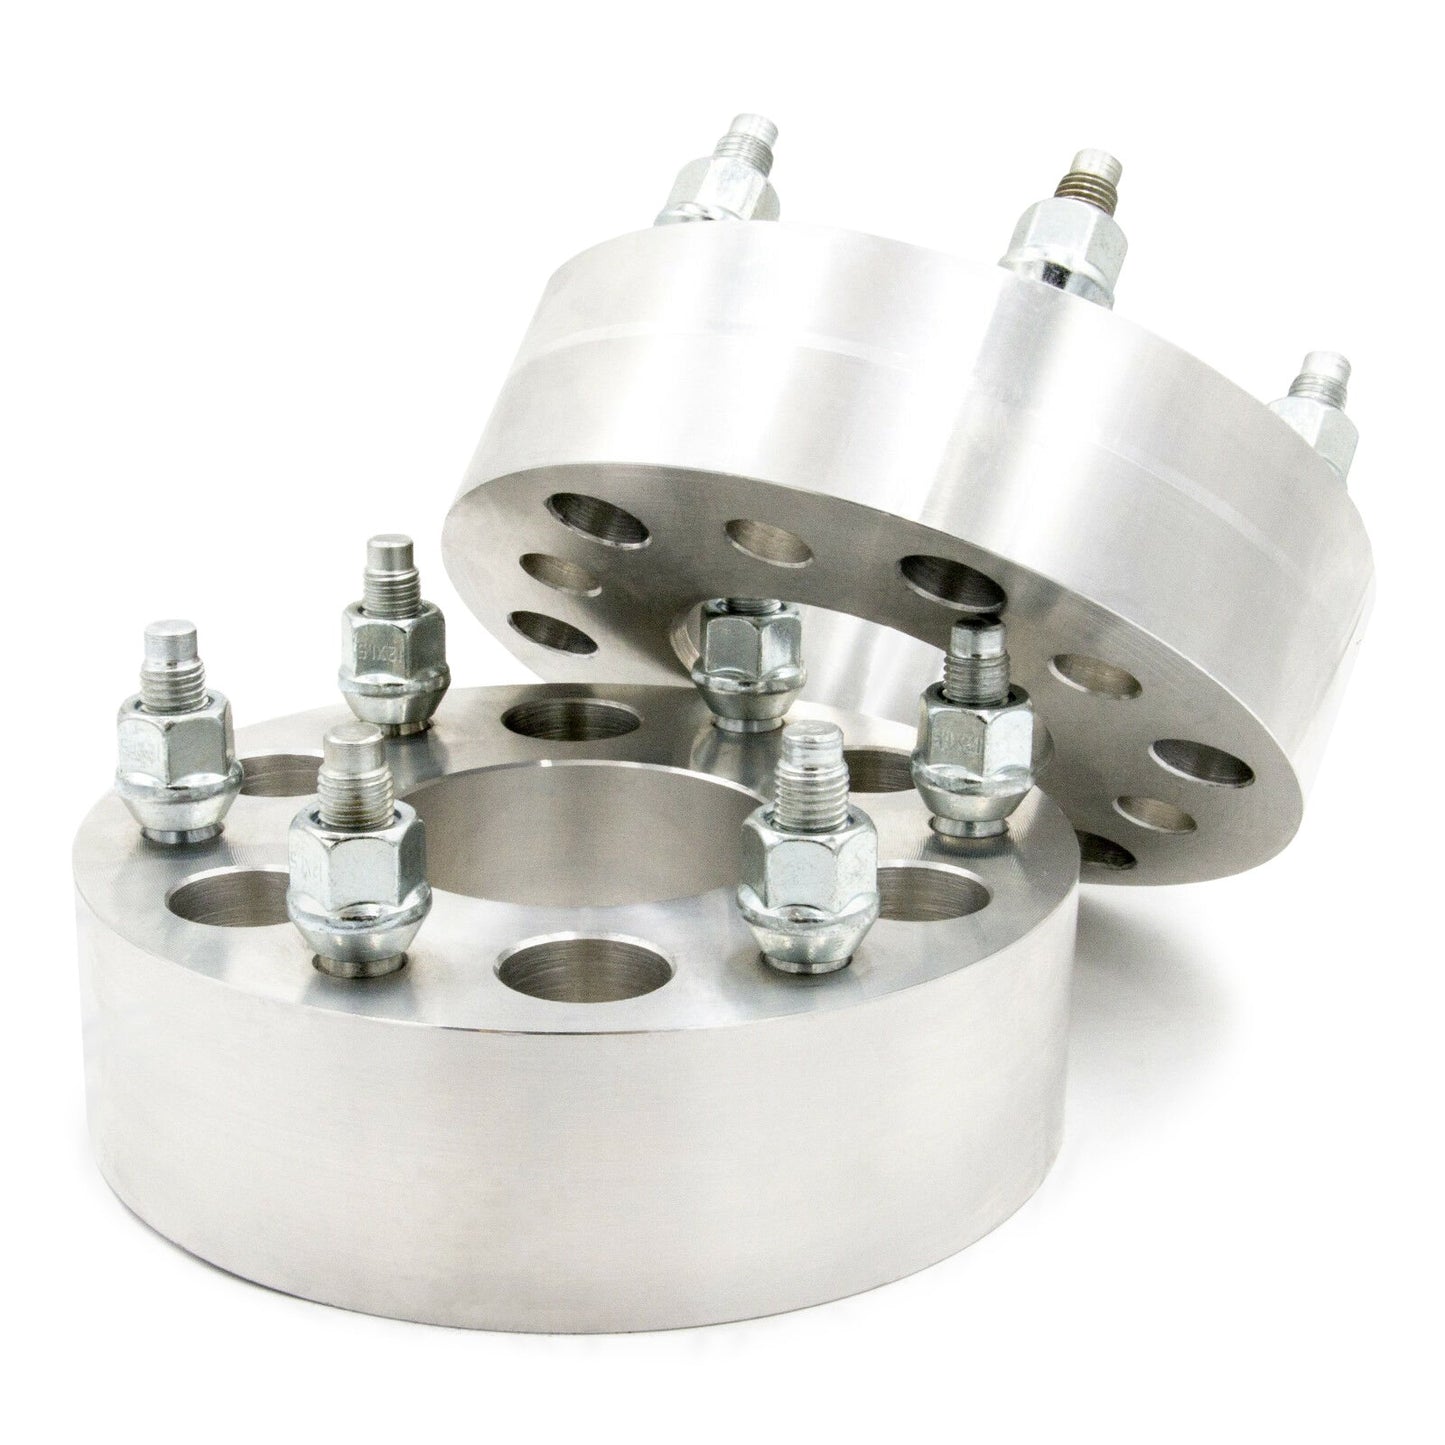 6x5.5" to 6x4.5" Wheel Spacer/Adapter - Thickness: 3/4"- 4"